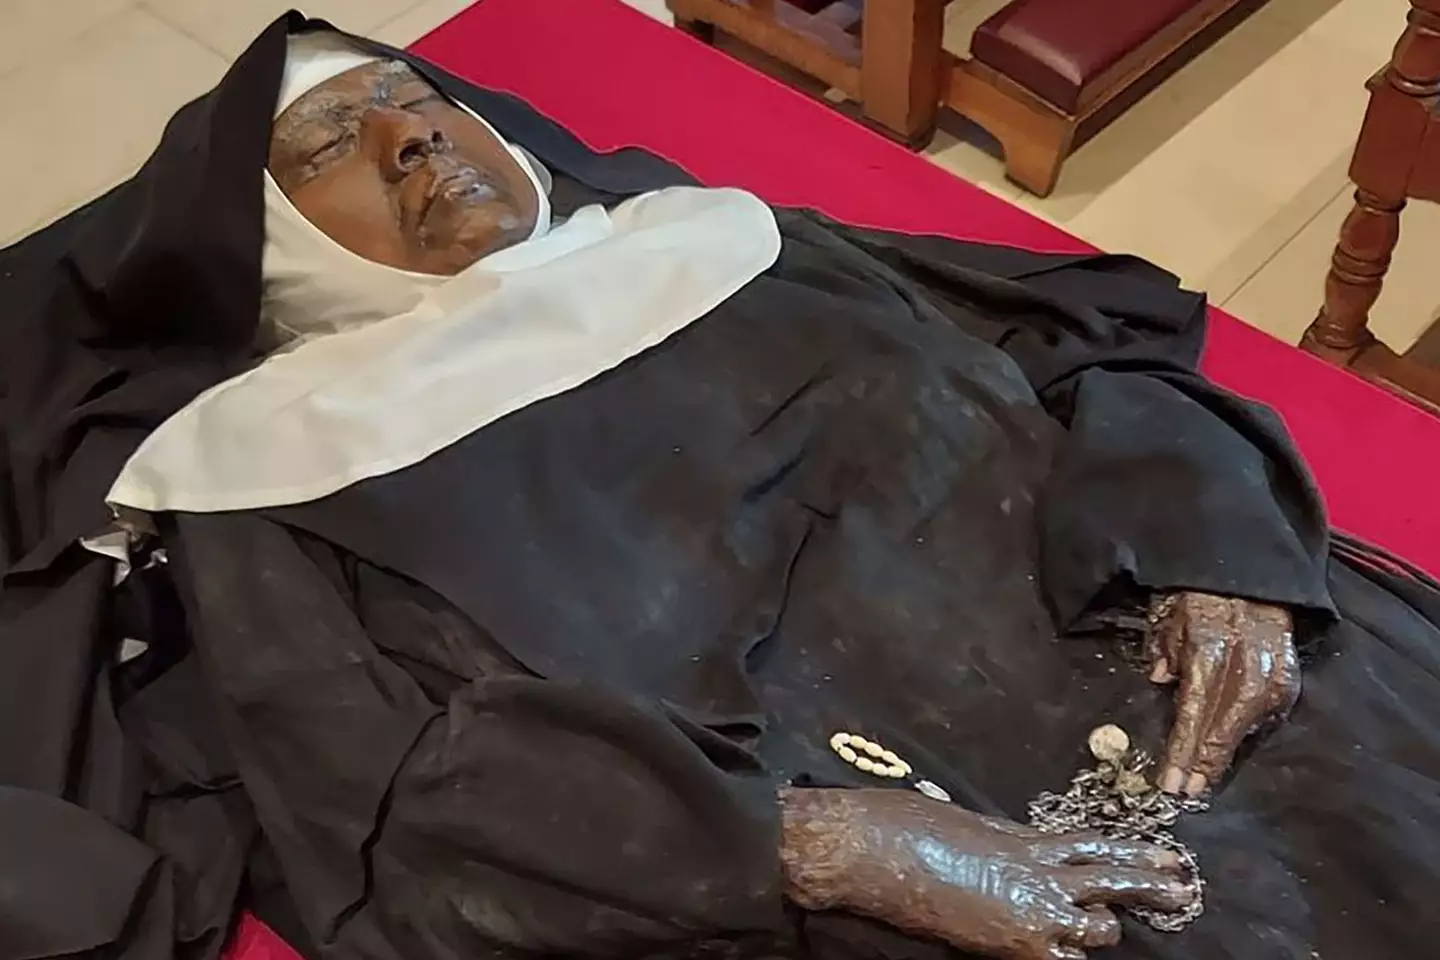 The Benedictines Of Mary nuns were astonished to discover the remains of Sister Wilhelmina Lancaster intact.